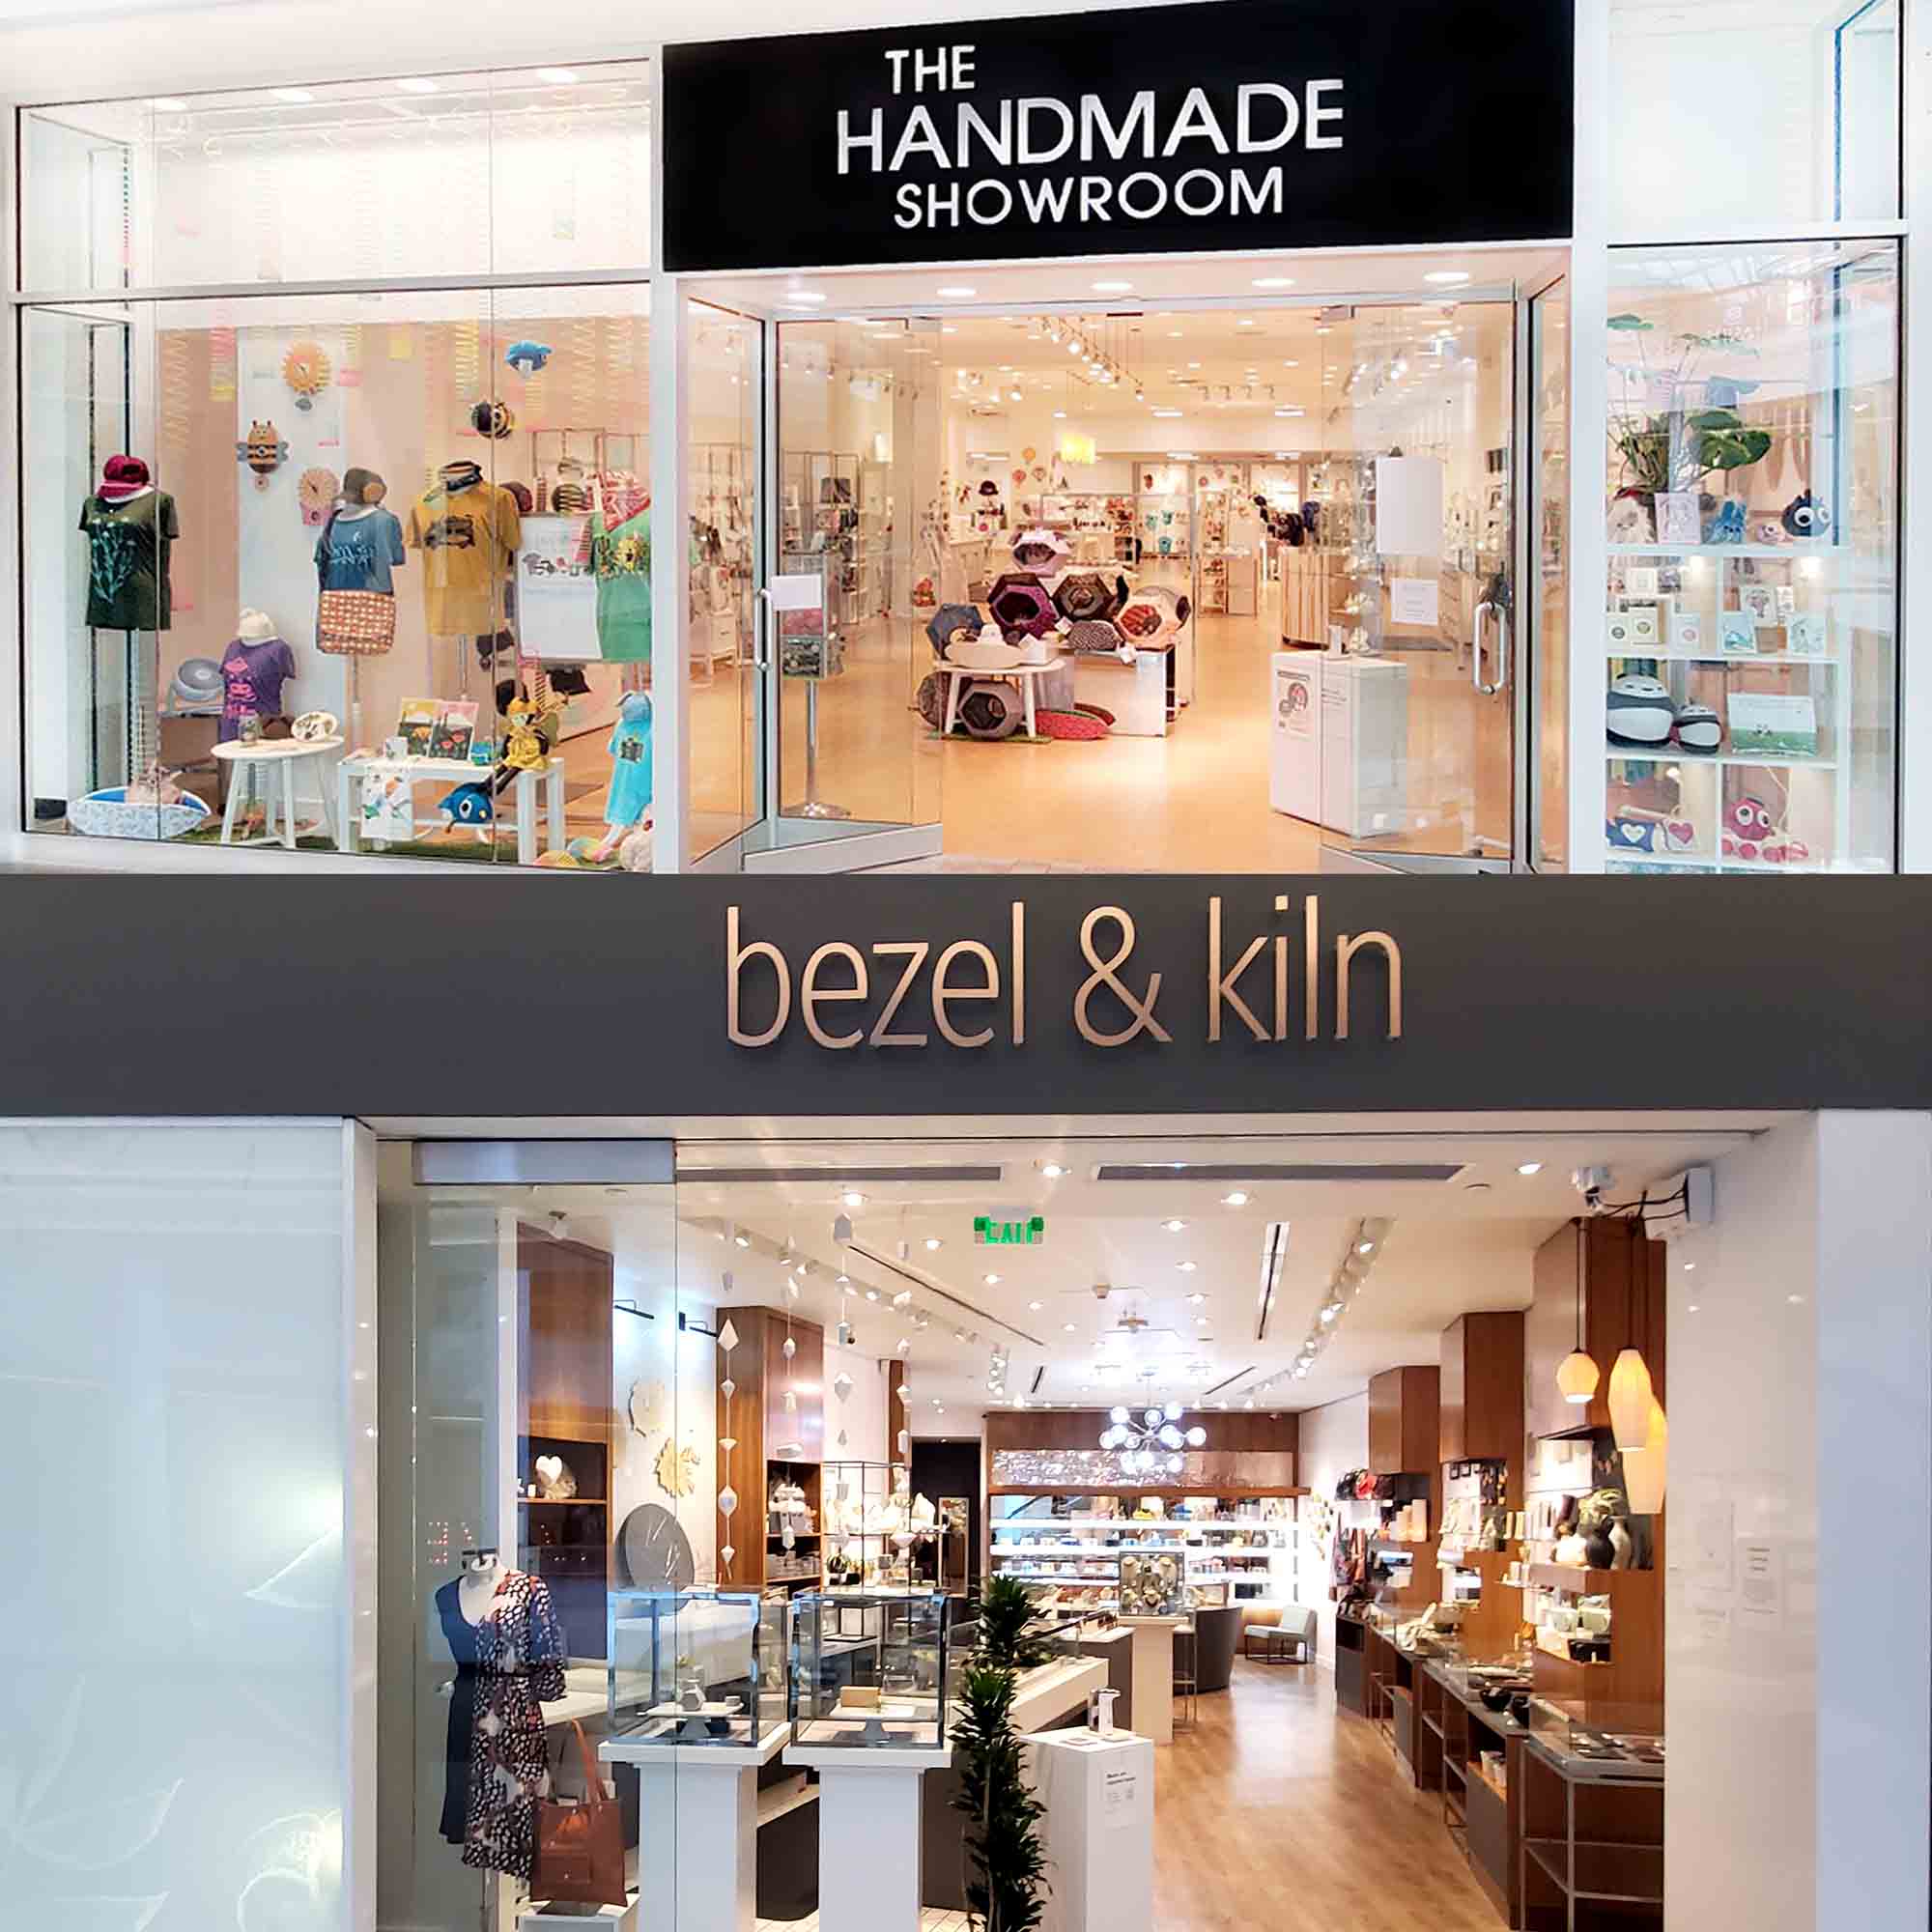 Bezel & Kiln is closing our Storefront and Moving into The Handmade Showroom